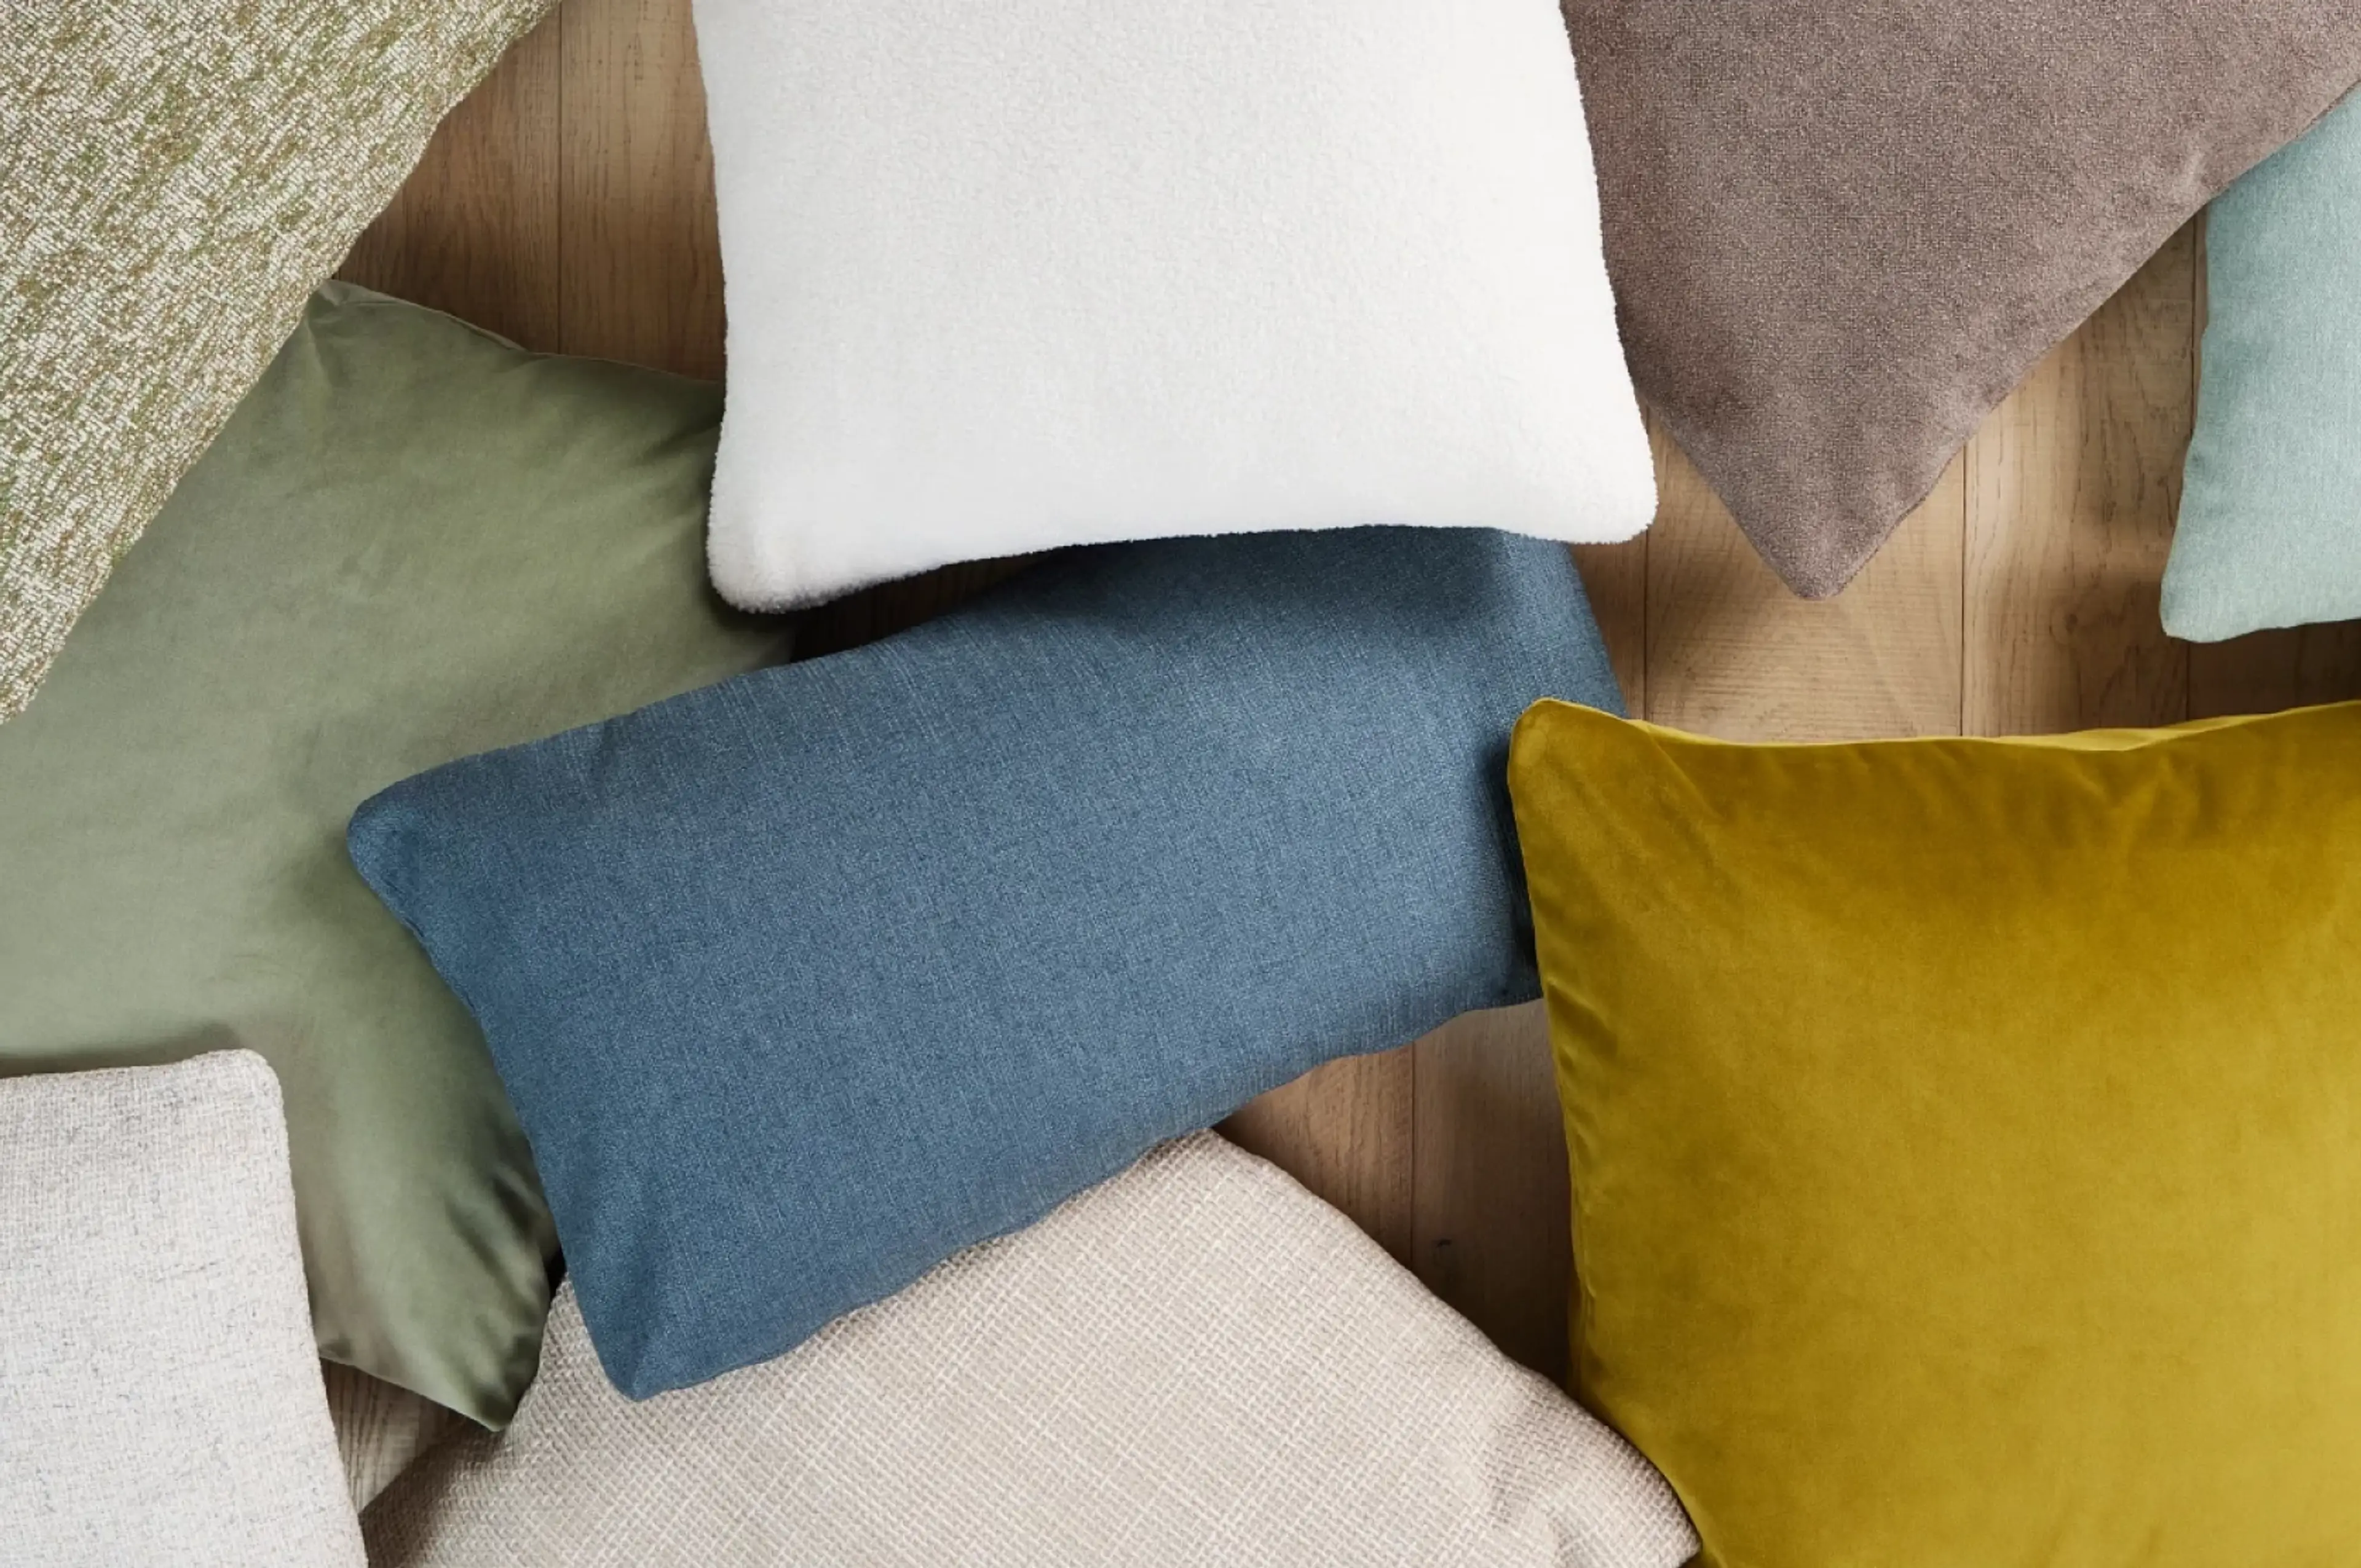 New pillows in every color and pattern